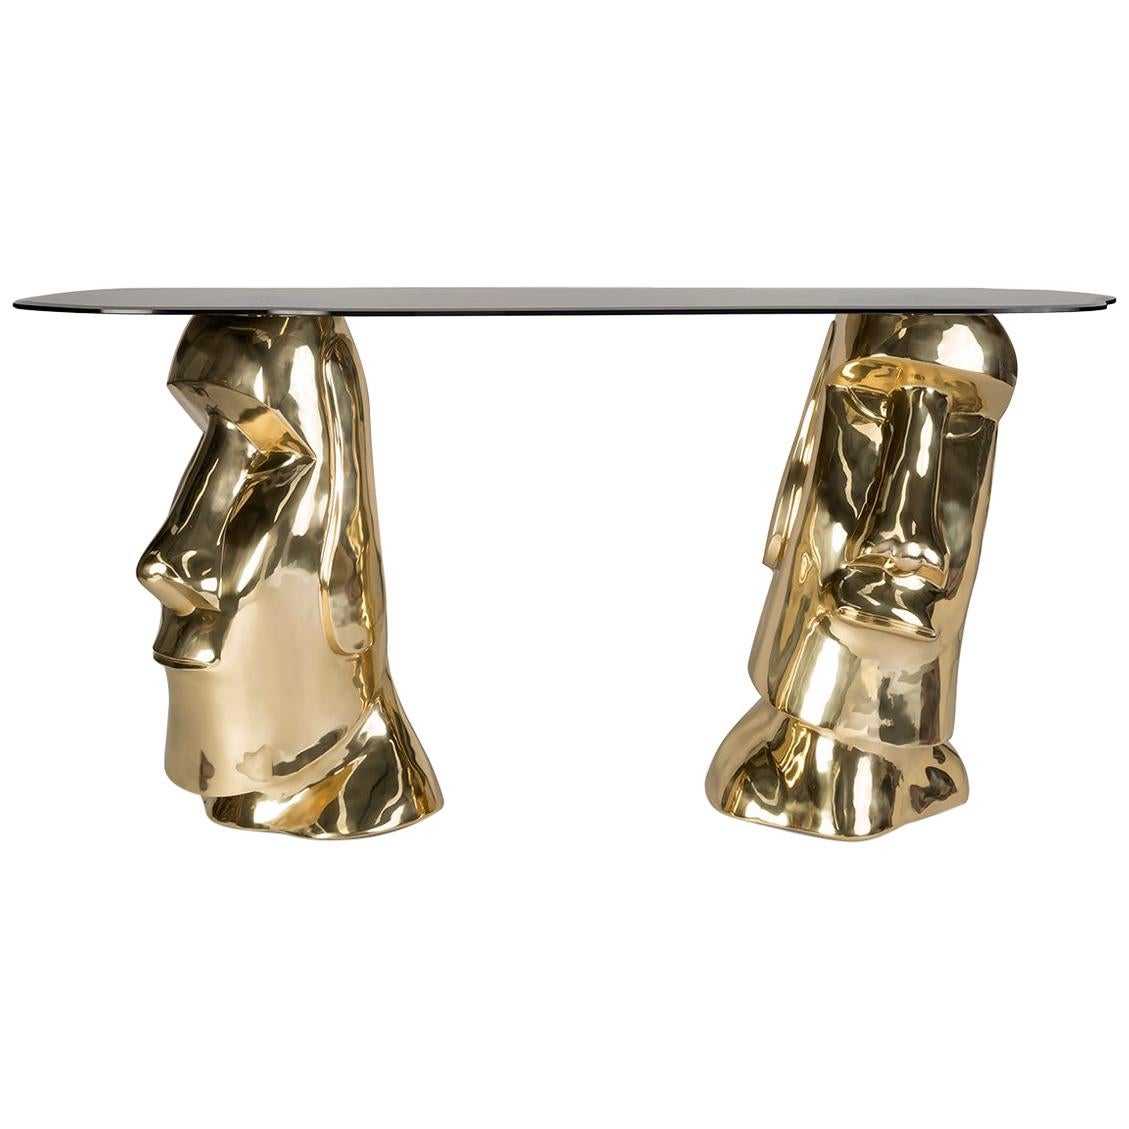 Contemporary Moai Console Table in Polished Brass Cast and Bronze Tempered Glass